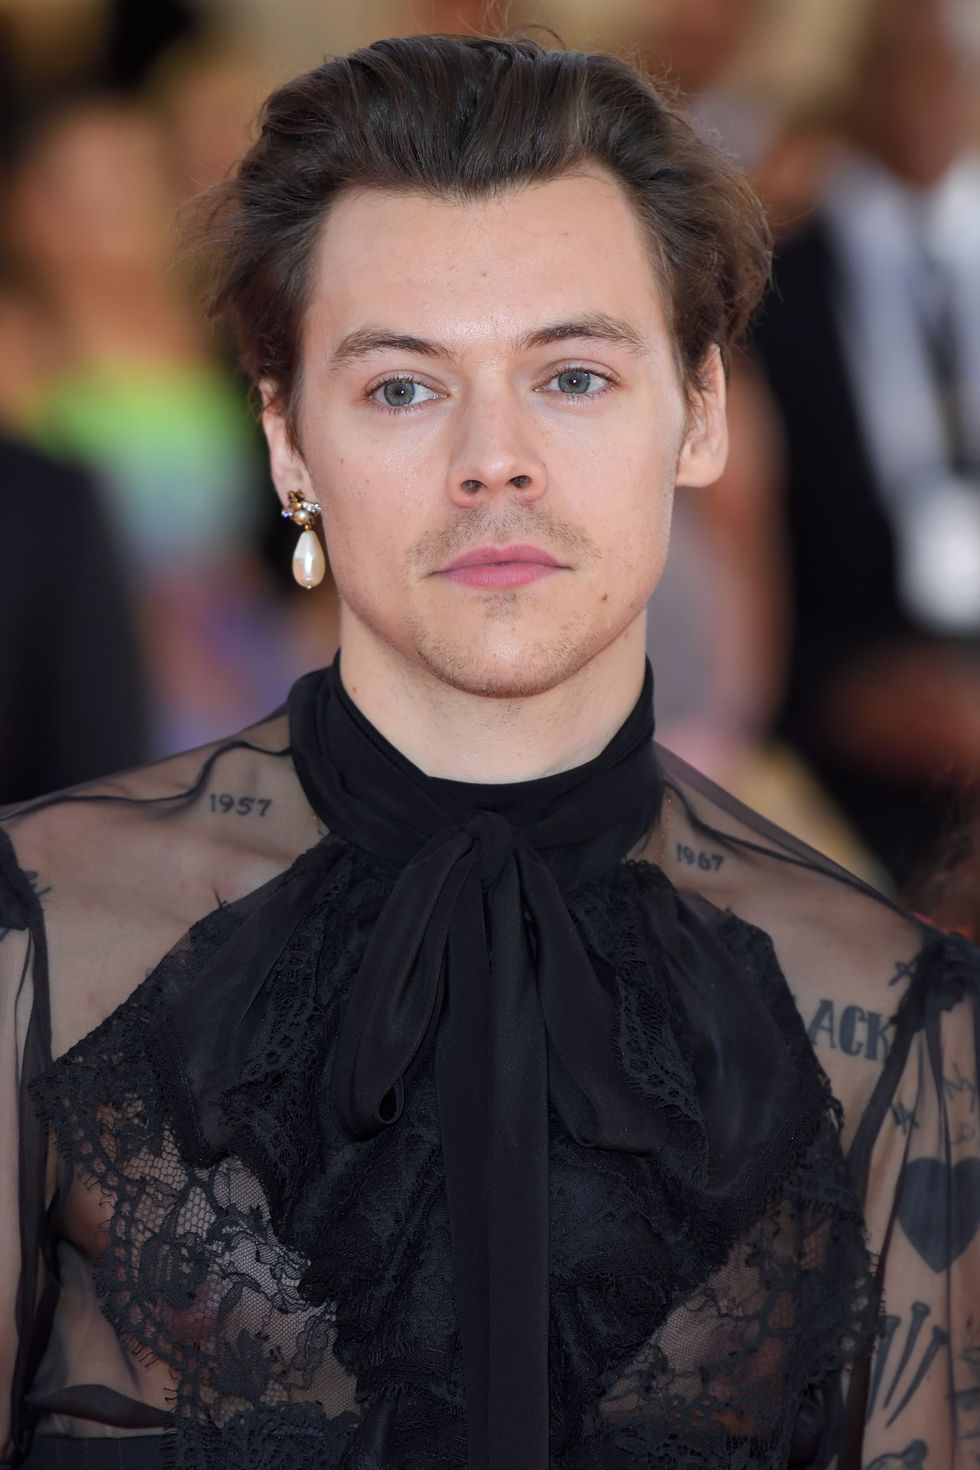 new york, new york   may 06 harry styles arrives for the 2019 met gala celebrating camp notes on fashion at the metropolitan museum of art on may 06, 2019 in new york city photo by karwai tanggetty images